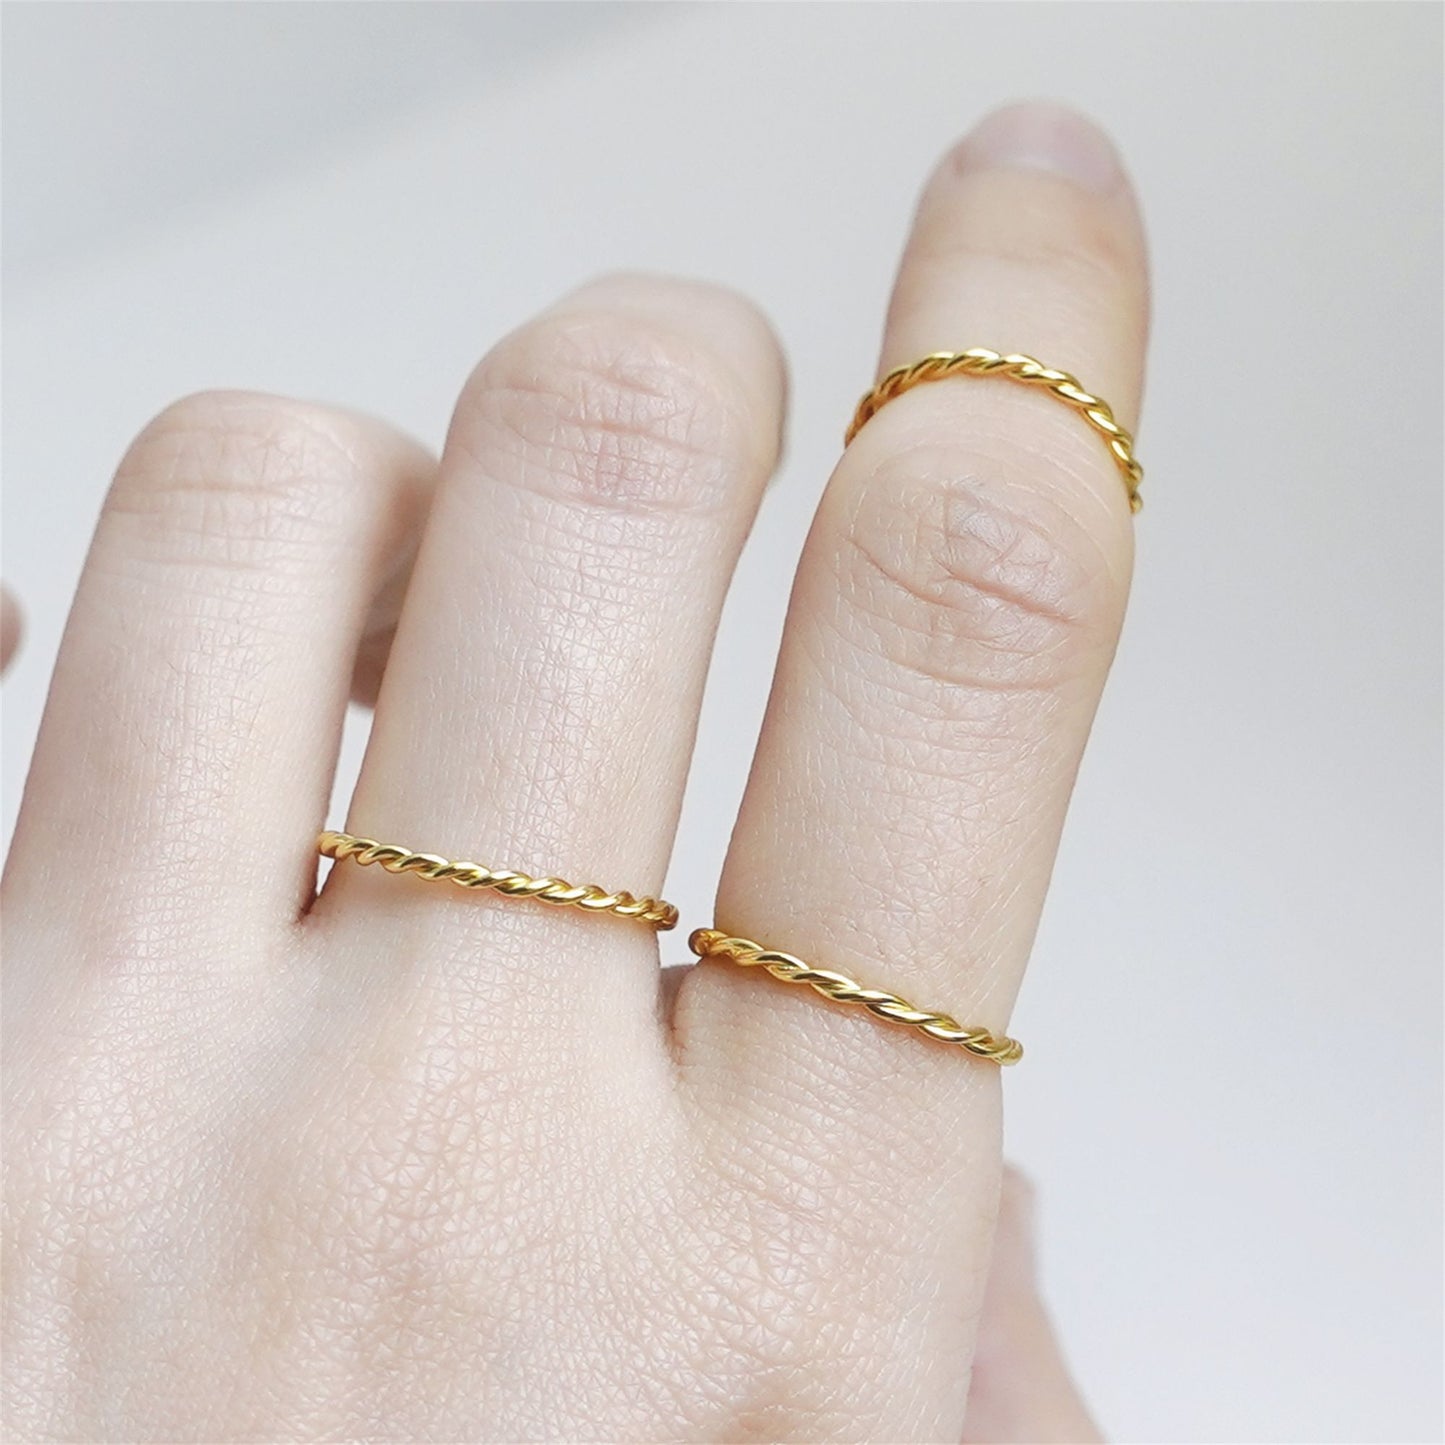 1.2 - 1.4mm Gold on Sterling Silver Twisted Spiral Band Stack Ring E1/2 - S - sugarkittenlondon